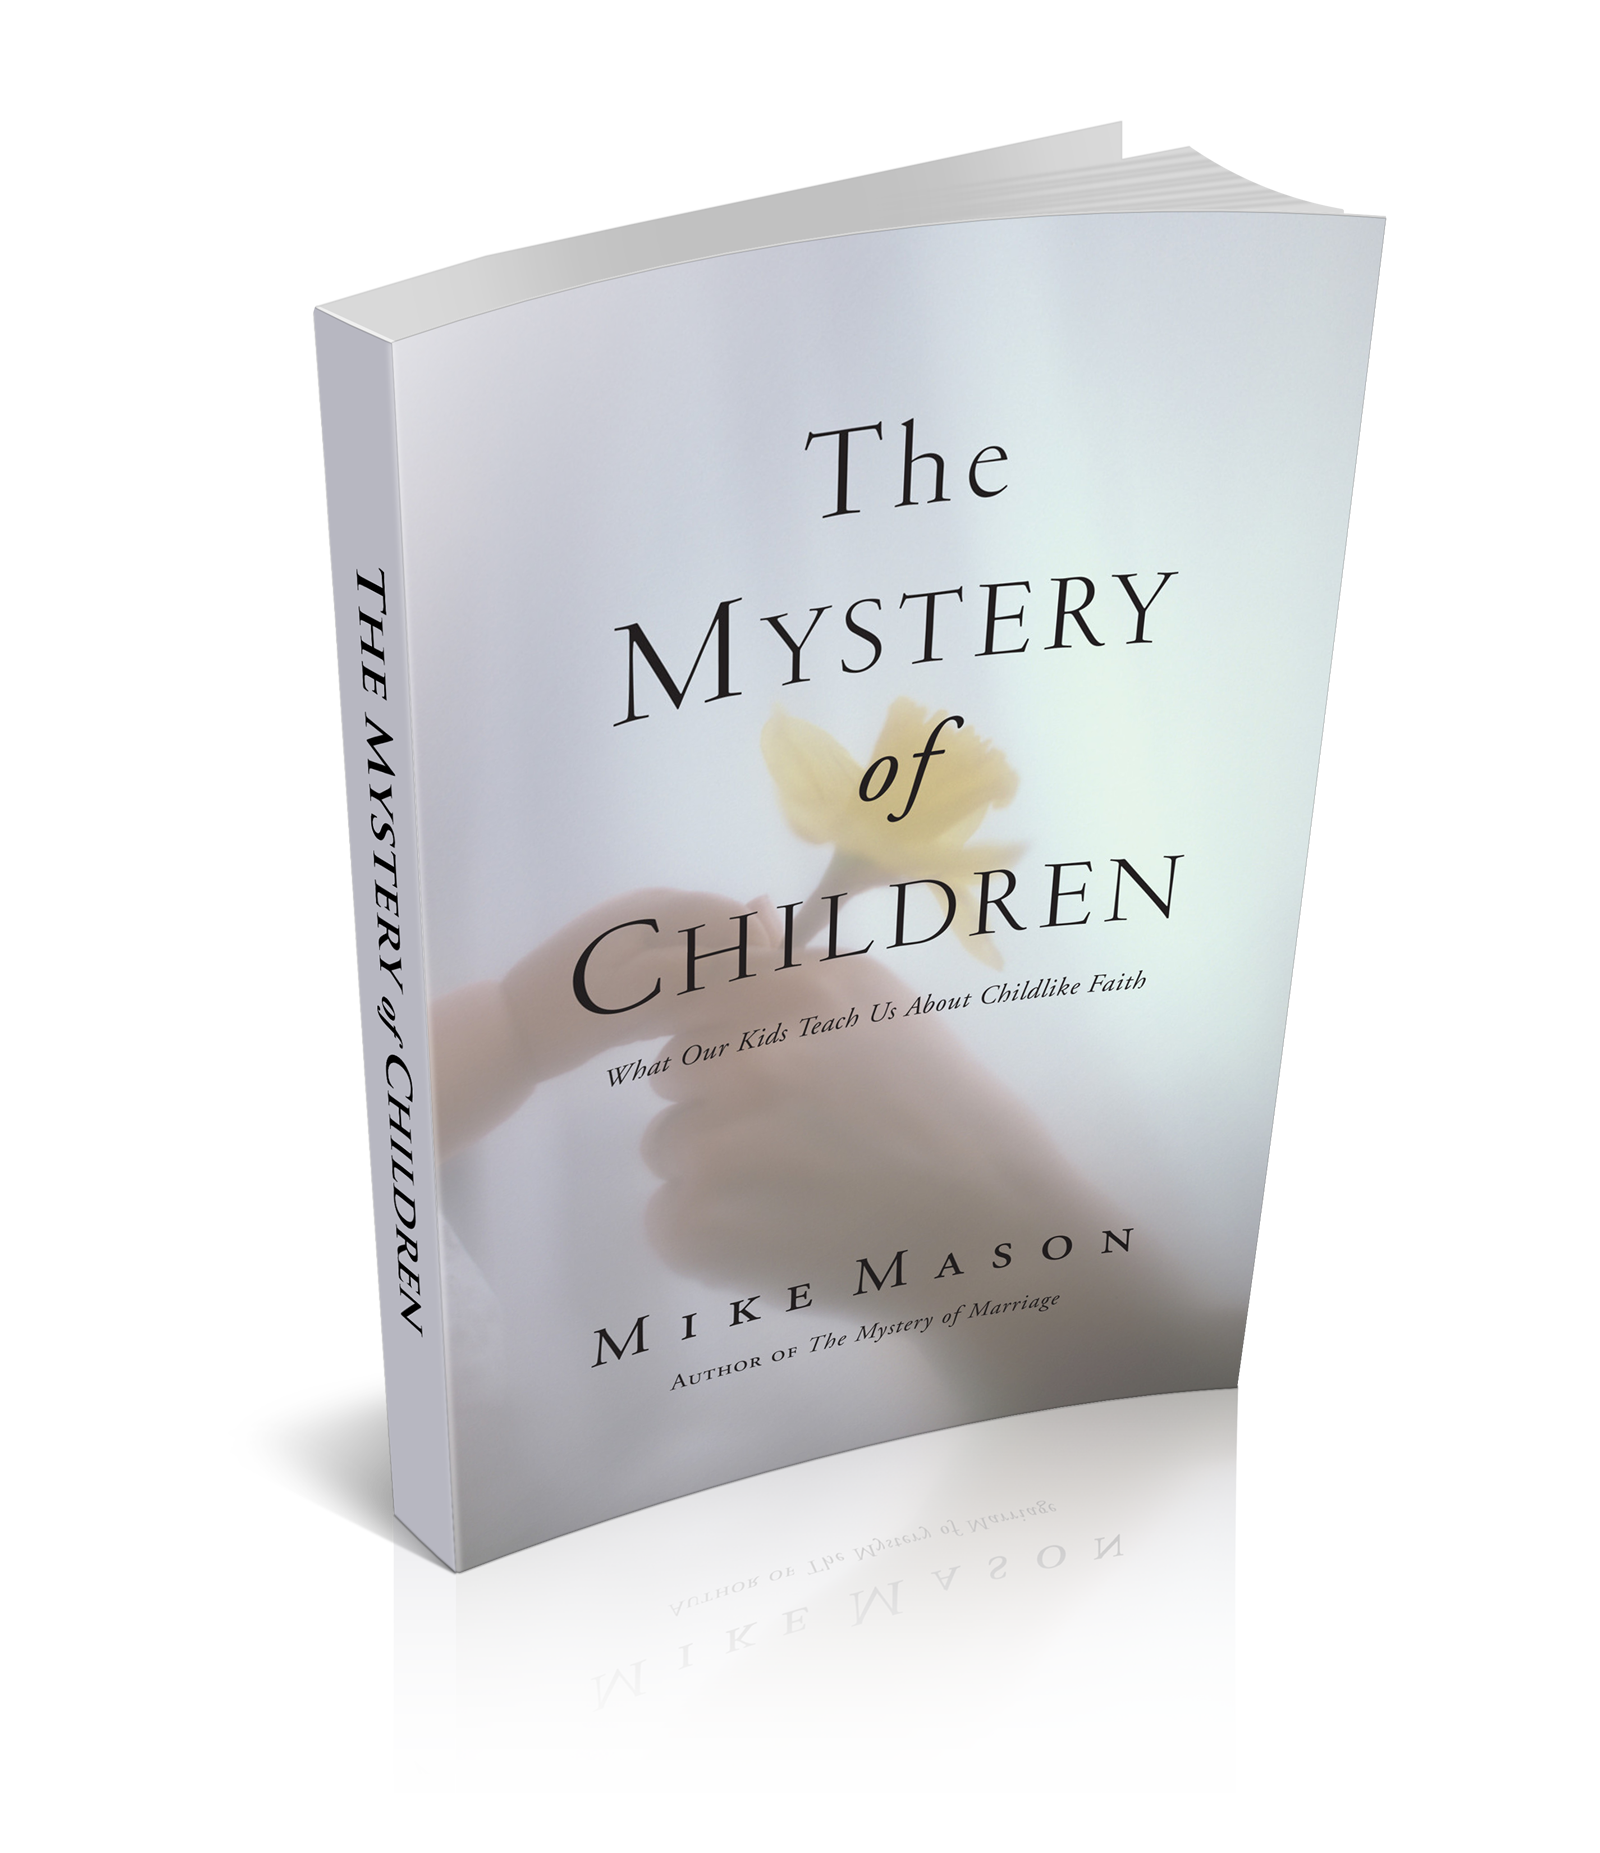 The Mystery of Children - Free eBook by Mike Mason